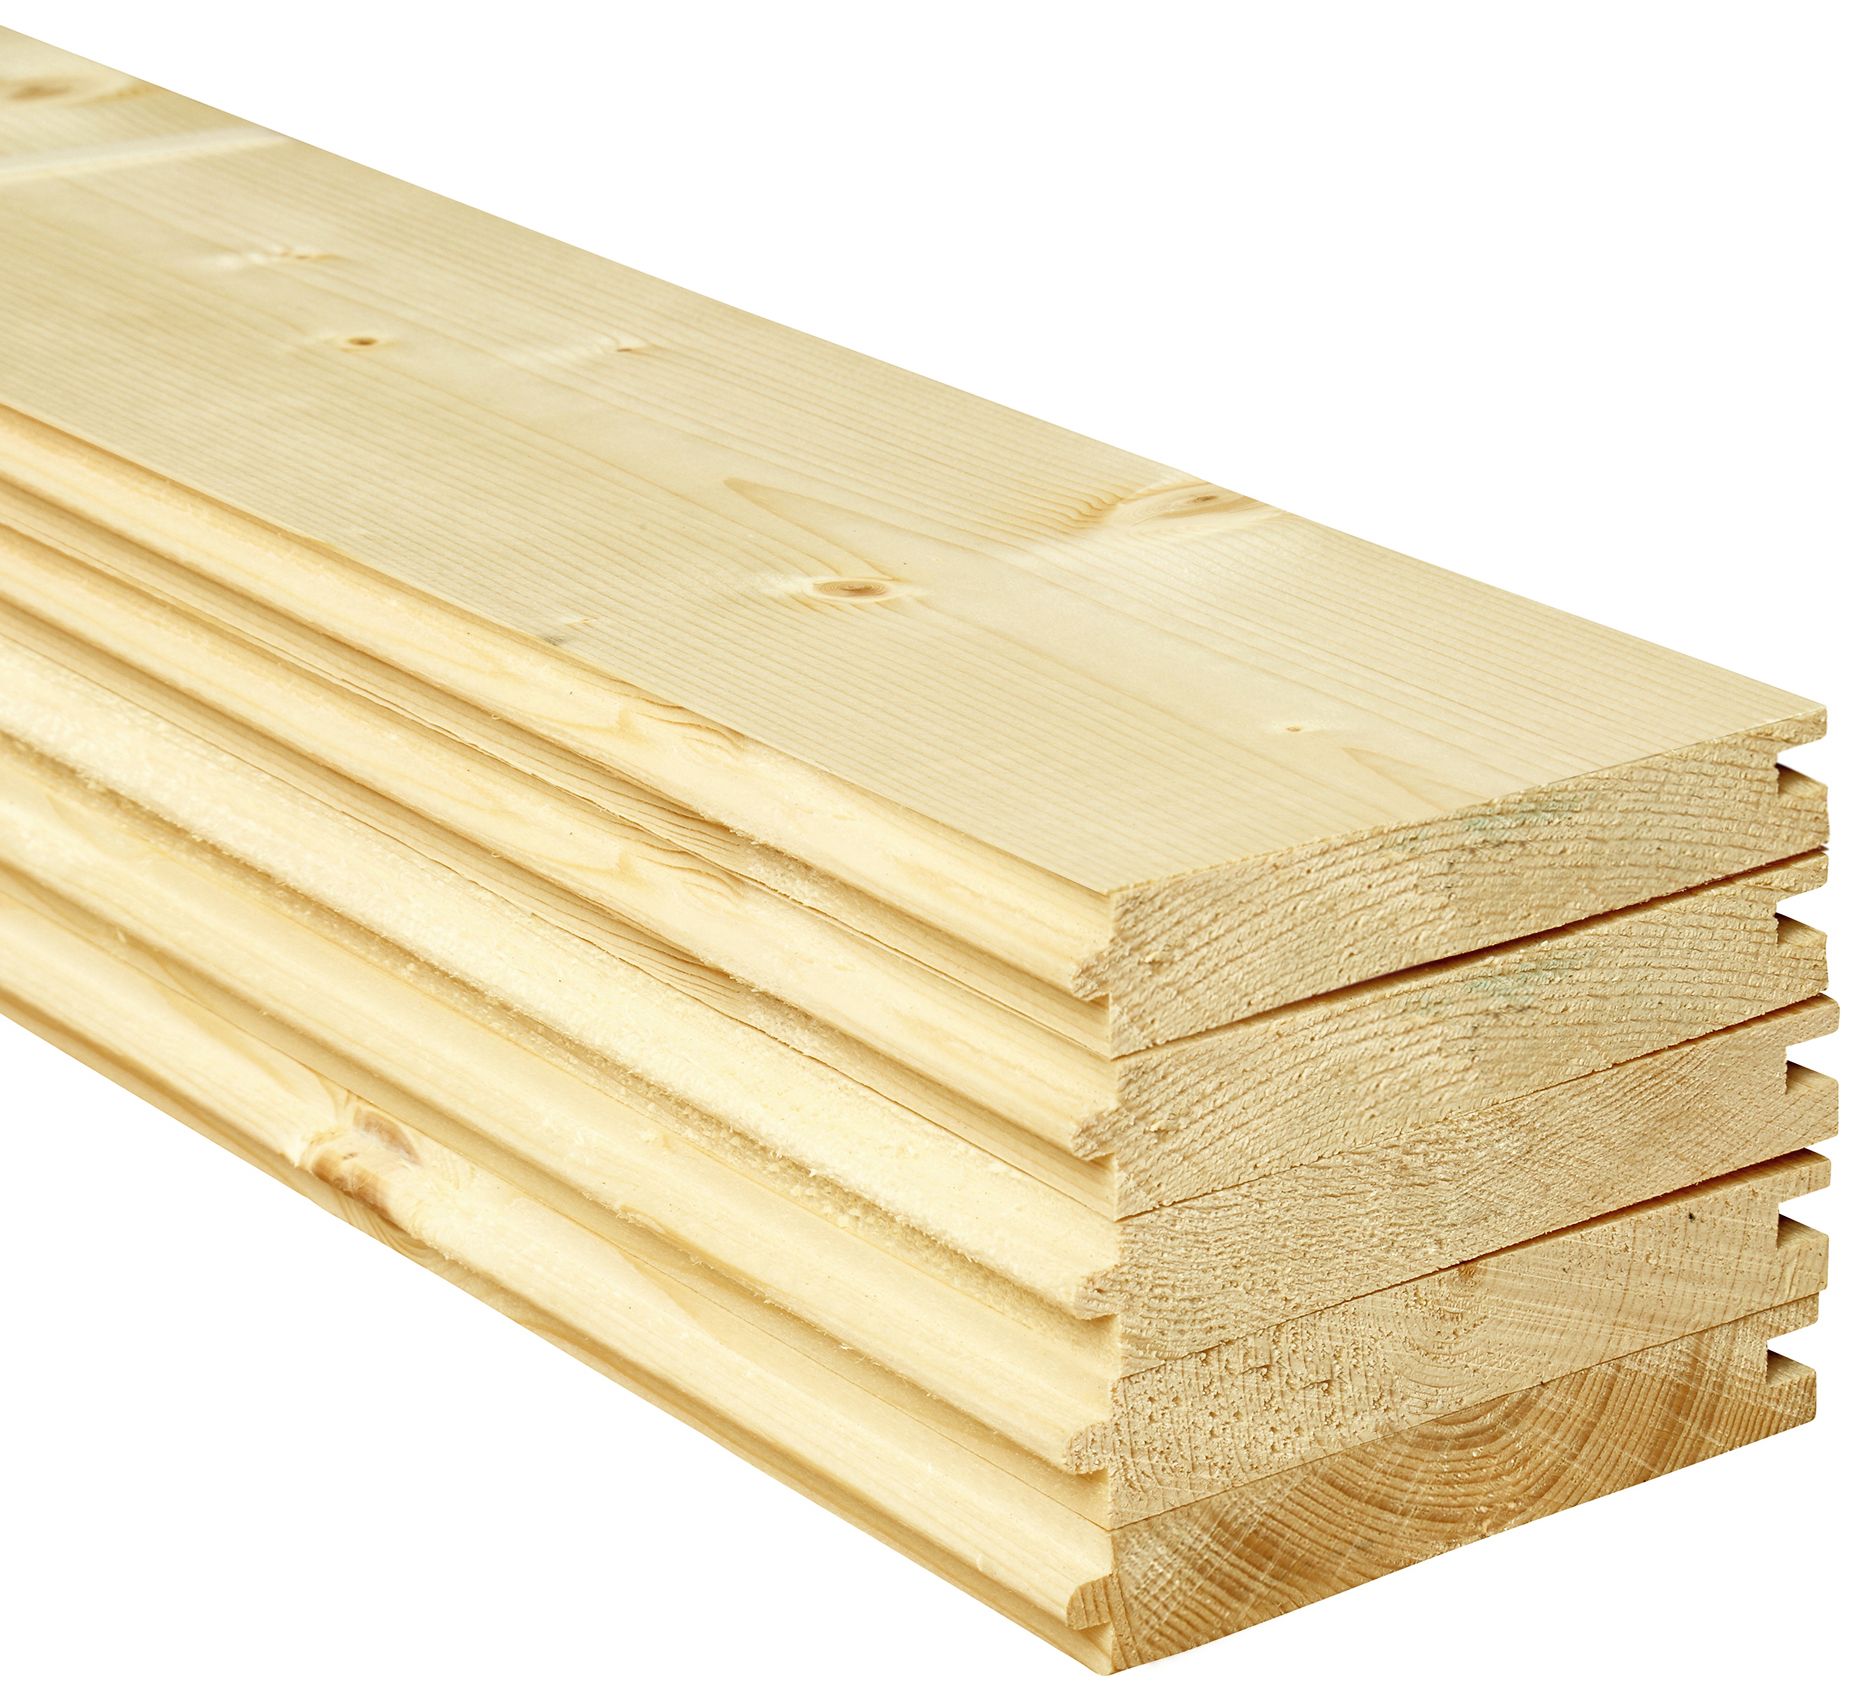 Image of Wickes PTG Timber Floorboards - 18 x 144 x 1800mm - Pack of 5